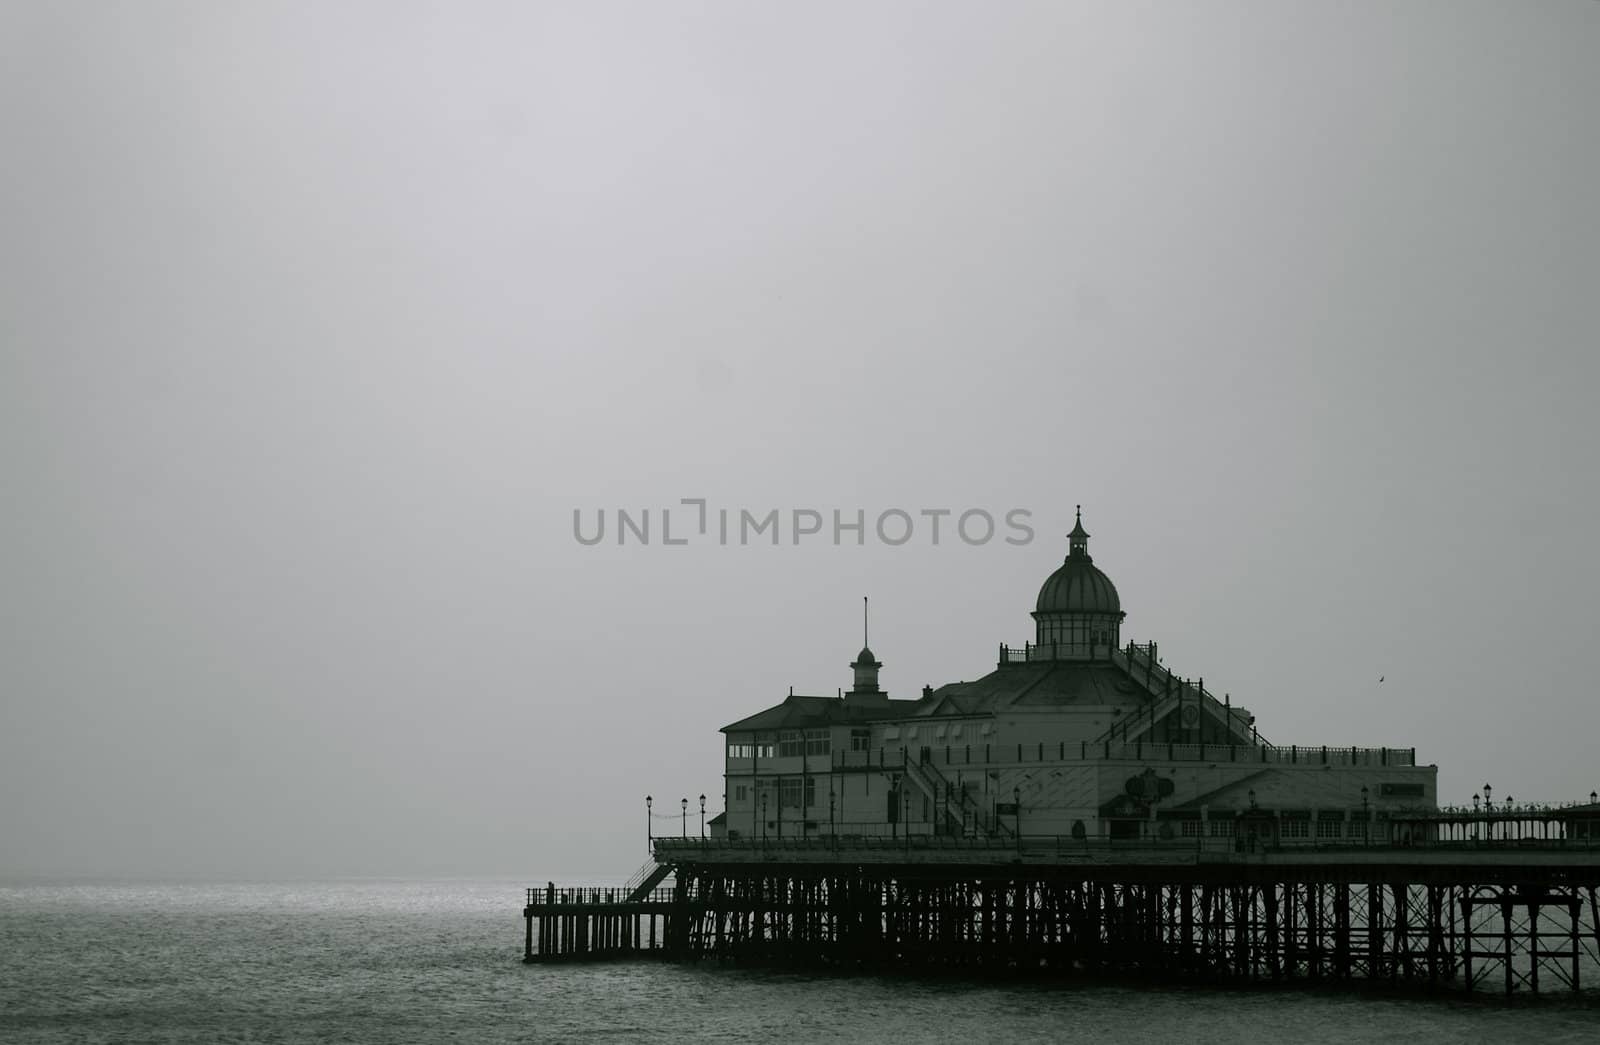 Long, old fashioned and ornate English seaside pier at Eastbourne, Sussex against a misty sky and dark grey ocean/ sea, with copy space.